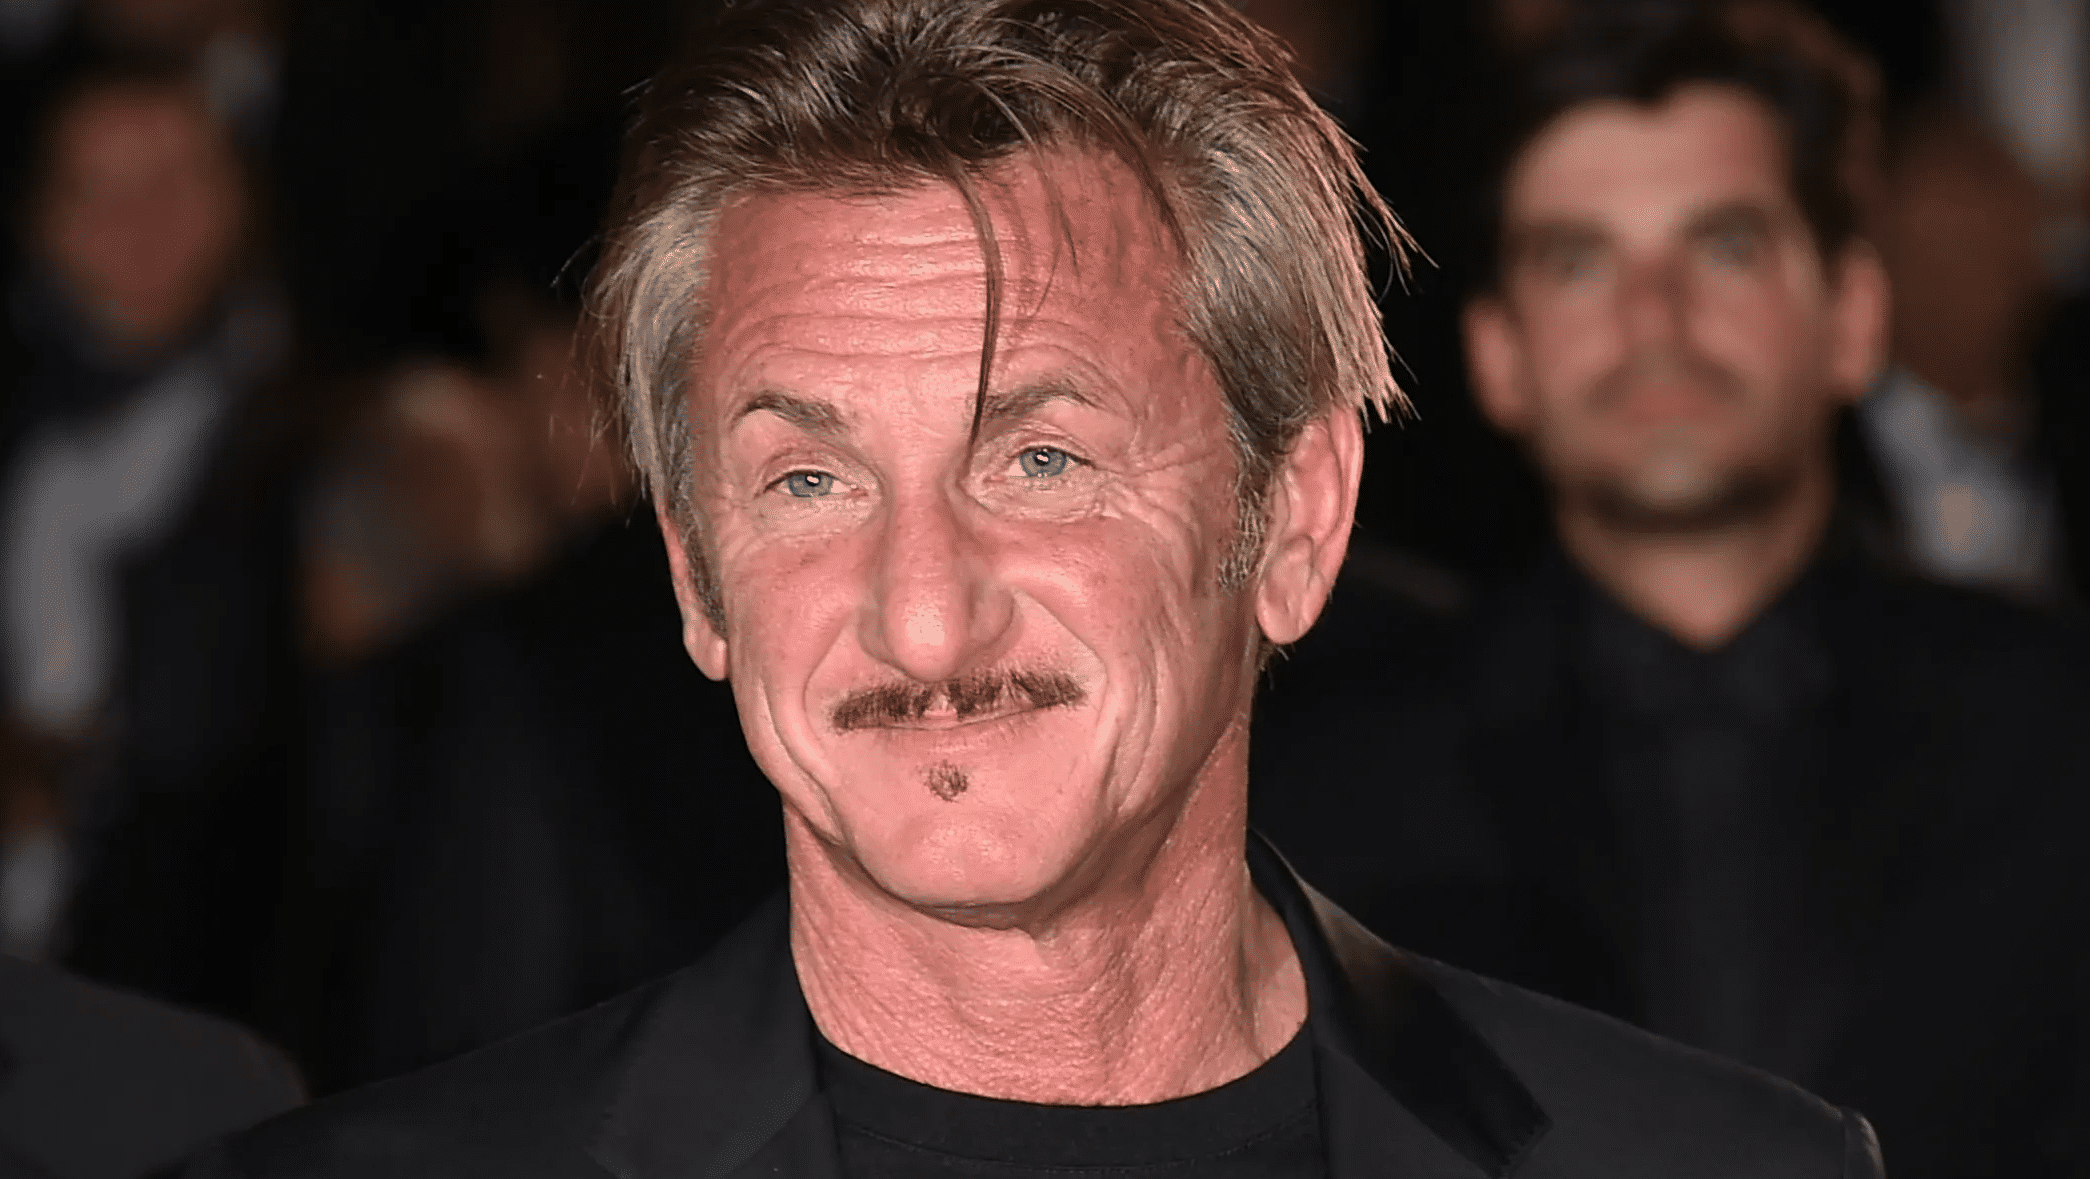 Sean Penn’s hairstyle at Golden Globes becomes topic of memes for Twitterati